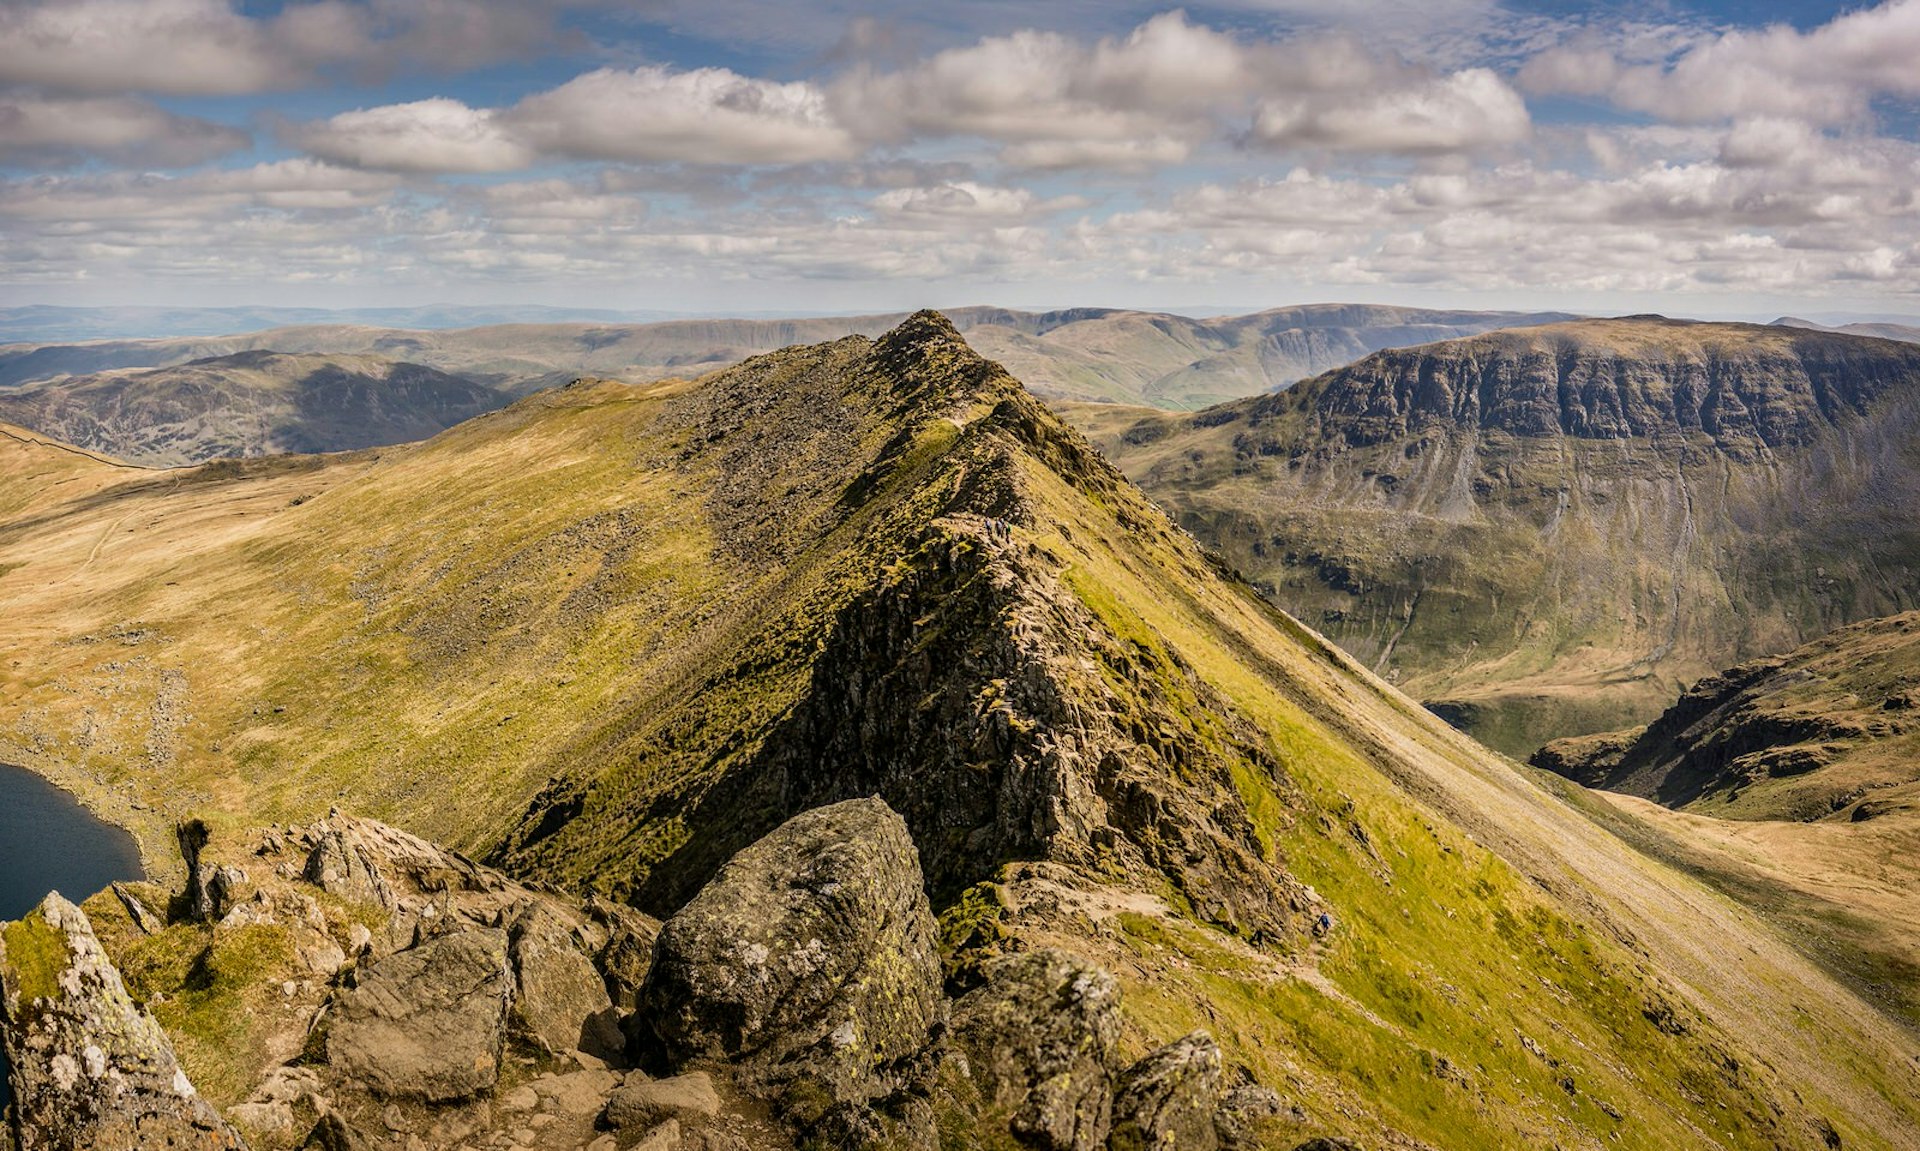 Helvellyn's Striding Edge ascent, viewed from the summit. The walkway is very narrow, running along a peak with steep edges either side. In the background are rolling green hills 